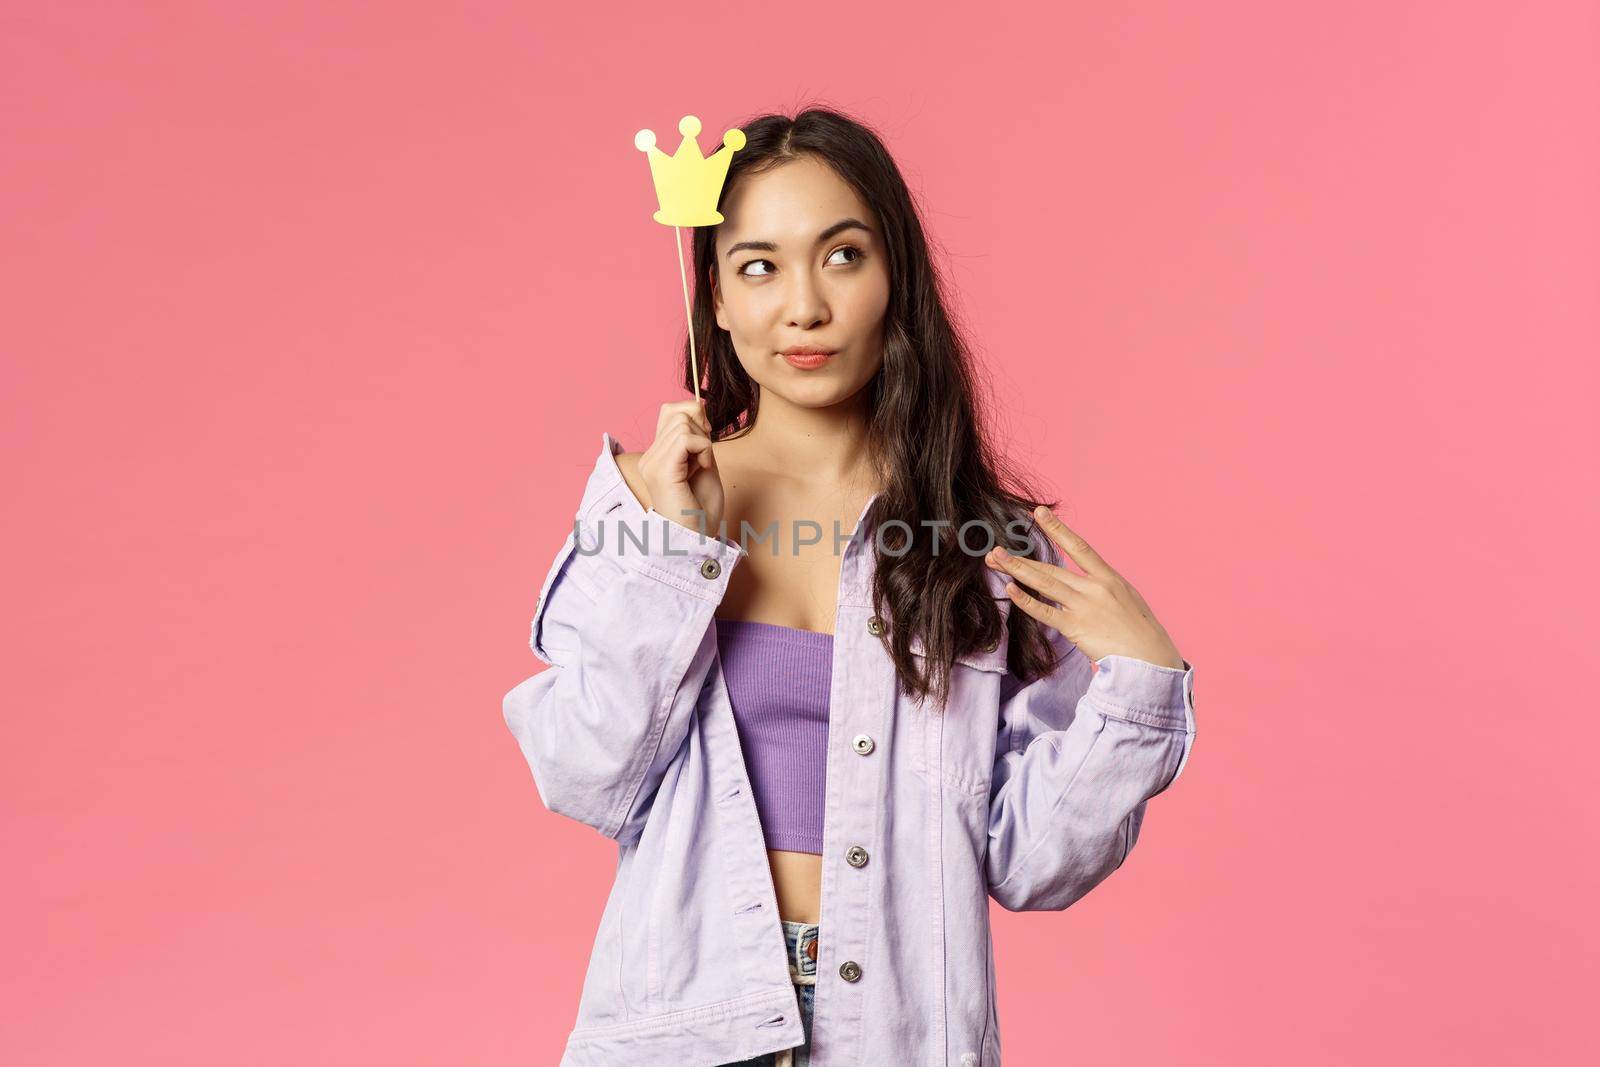 Holidays, lifestyle and people concept. Portrait of sassy, confident attractive asian girl looking thoughtful away, holding a crown stick over head, feel powerful like queen, pink background.